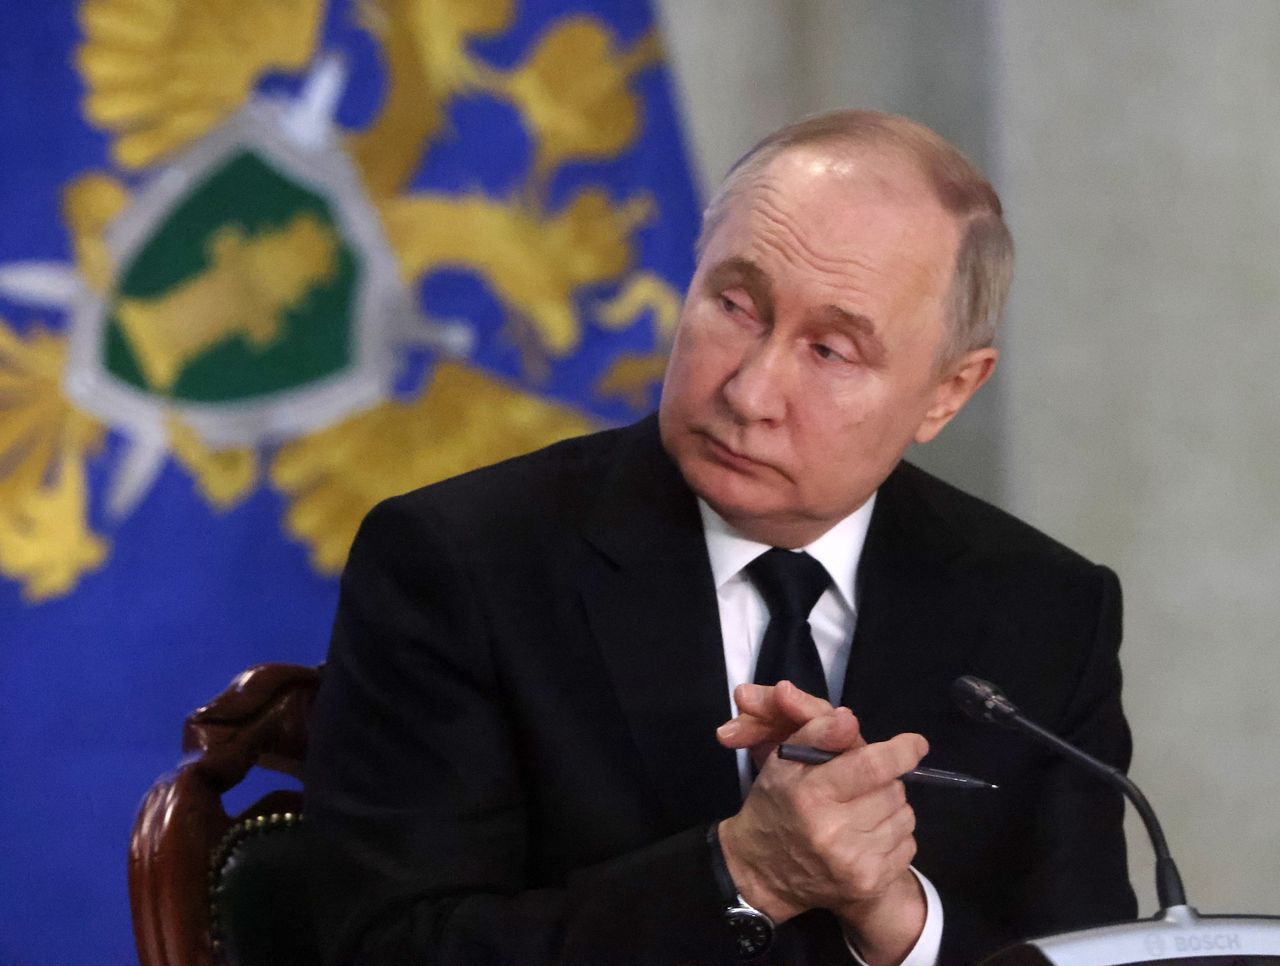 Putin secures fifth term: No change expected amid rising tensions